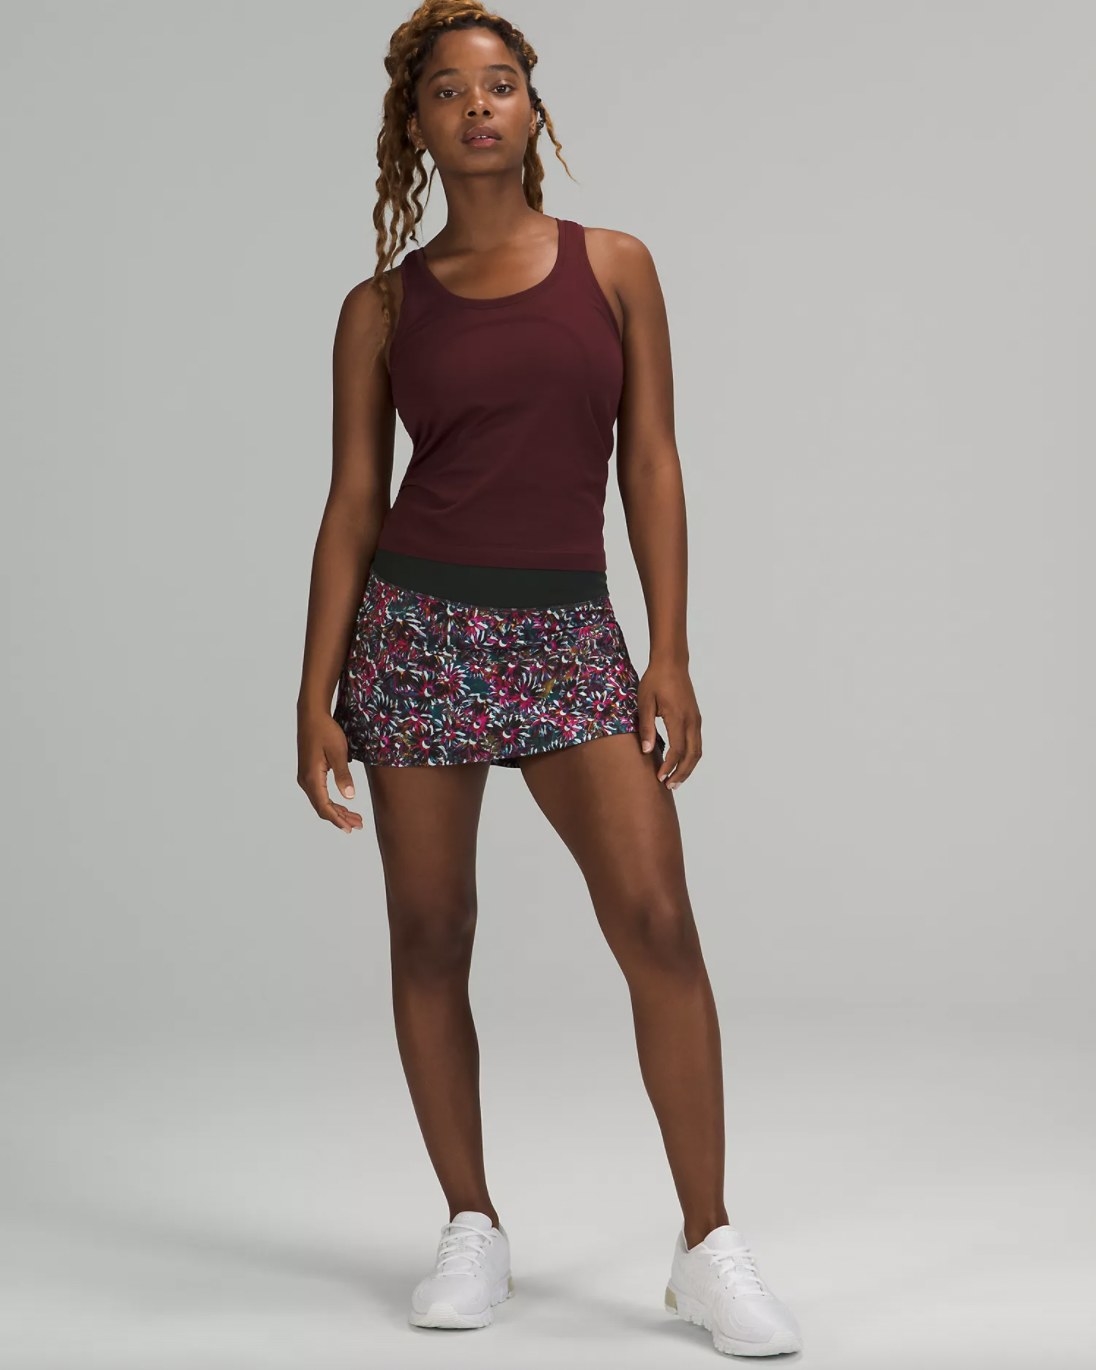 A woman wearing a burgundy tank top, a floral skirt, and white sneakers